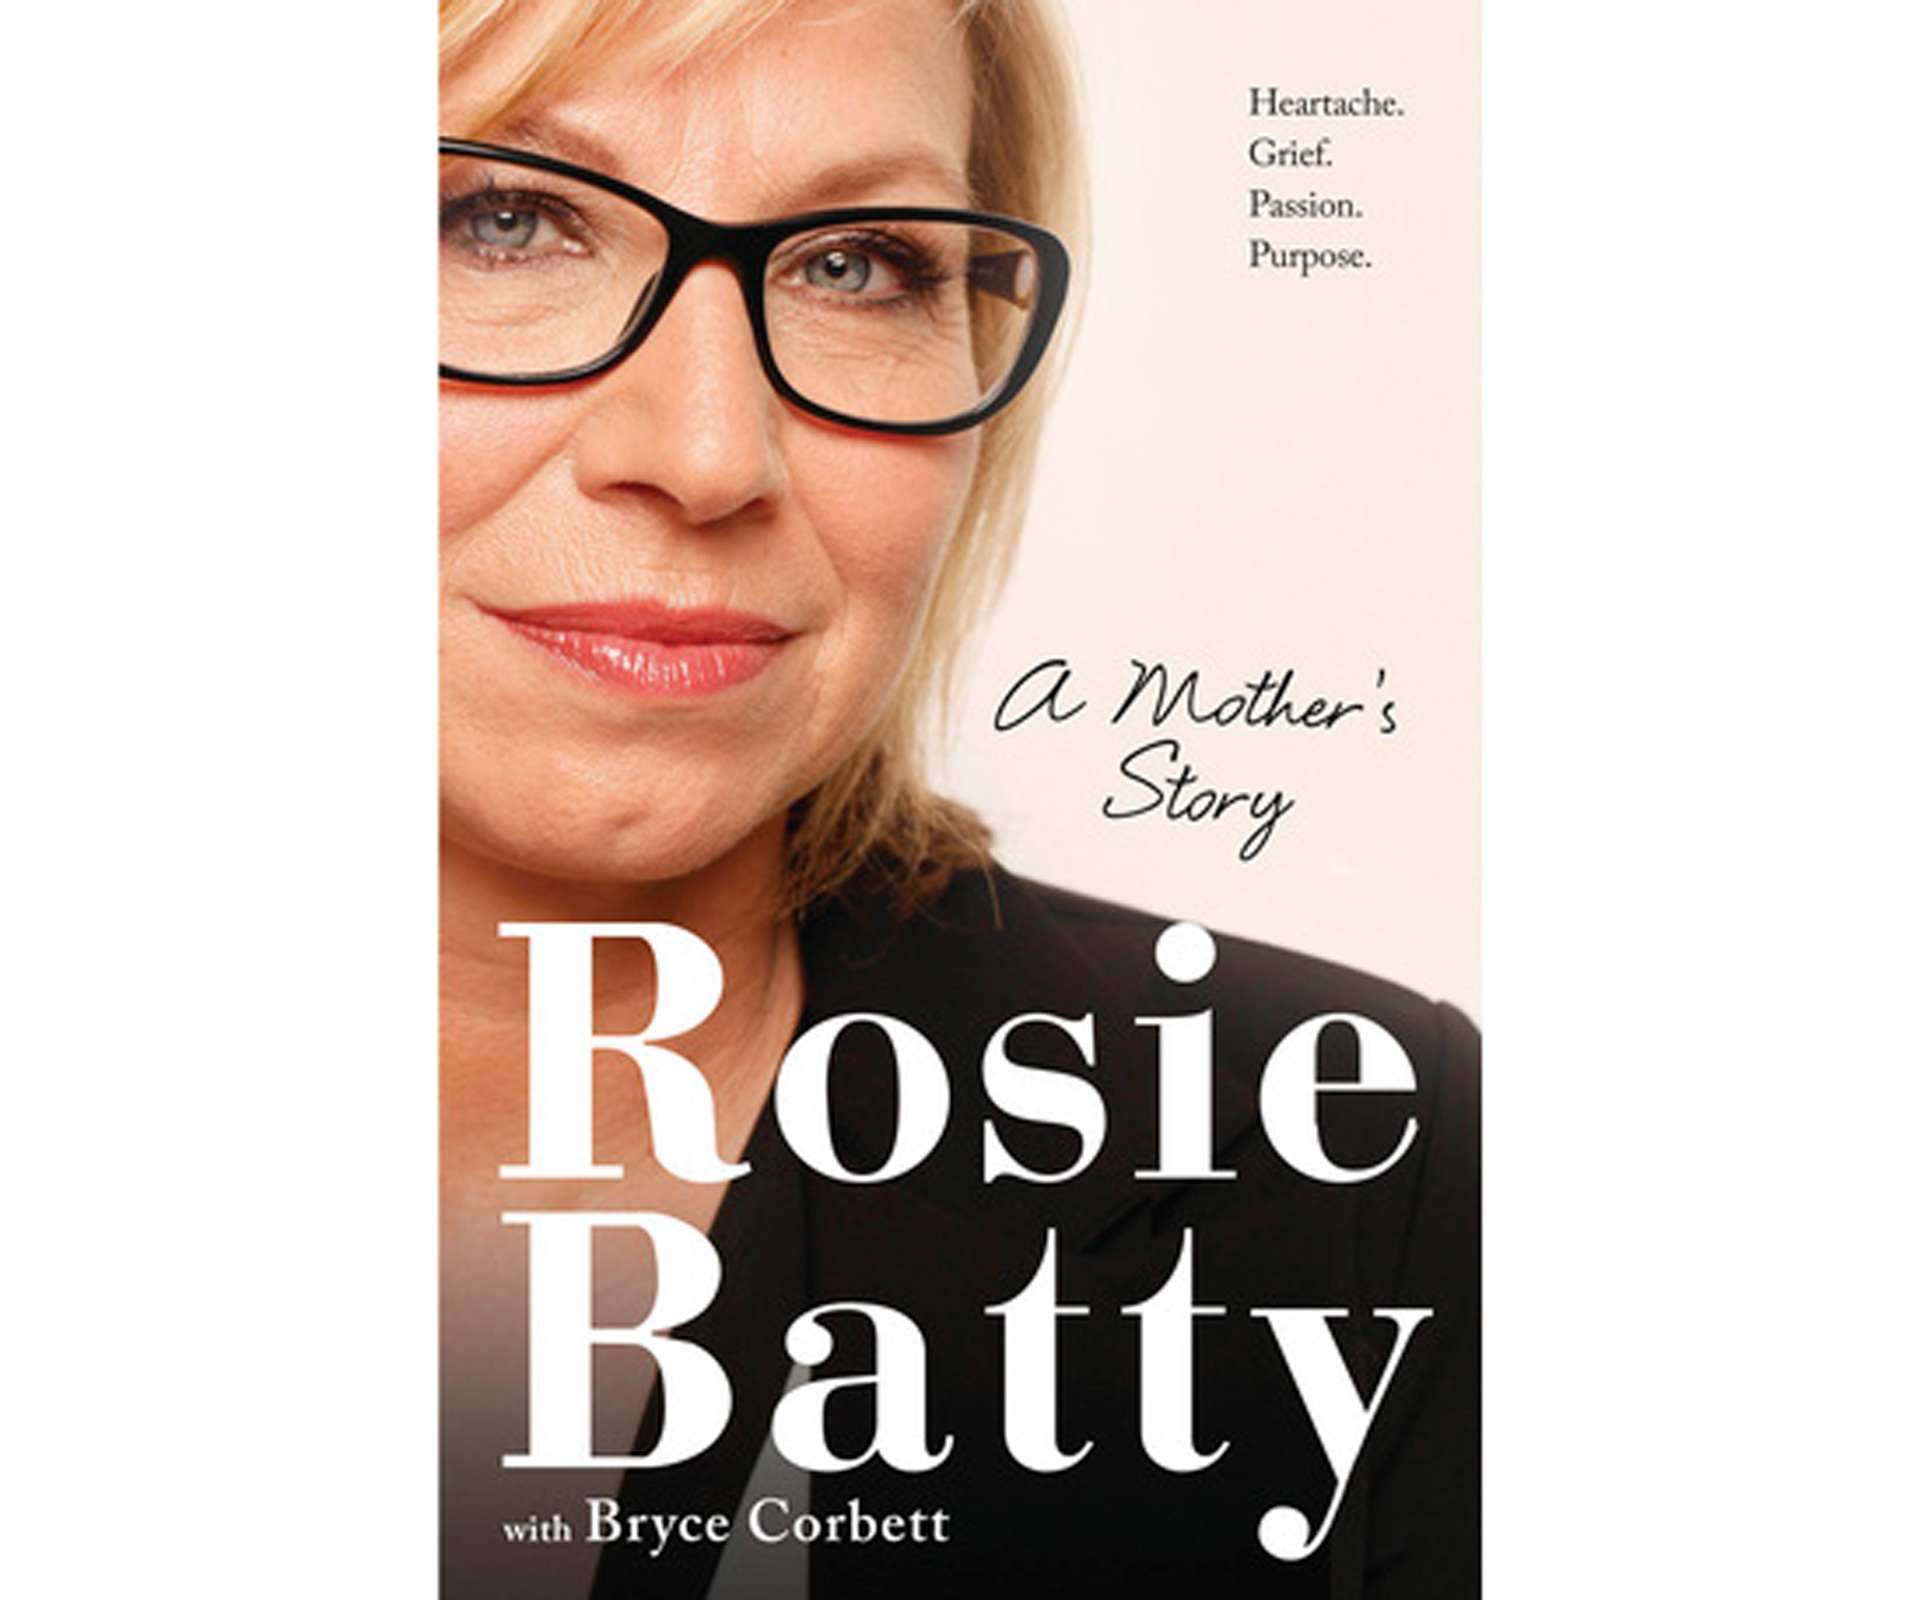 BOOK REVIEW: Rosie Batty, A Mother’s Story